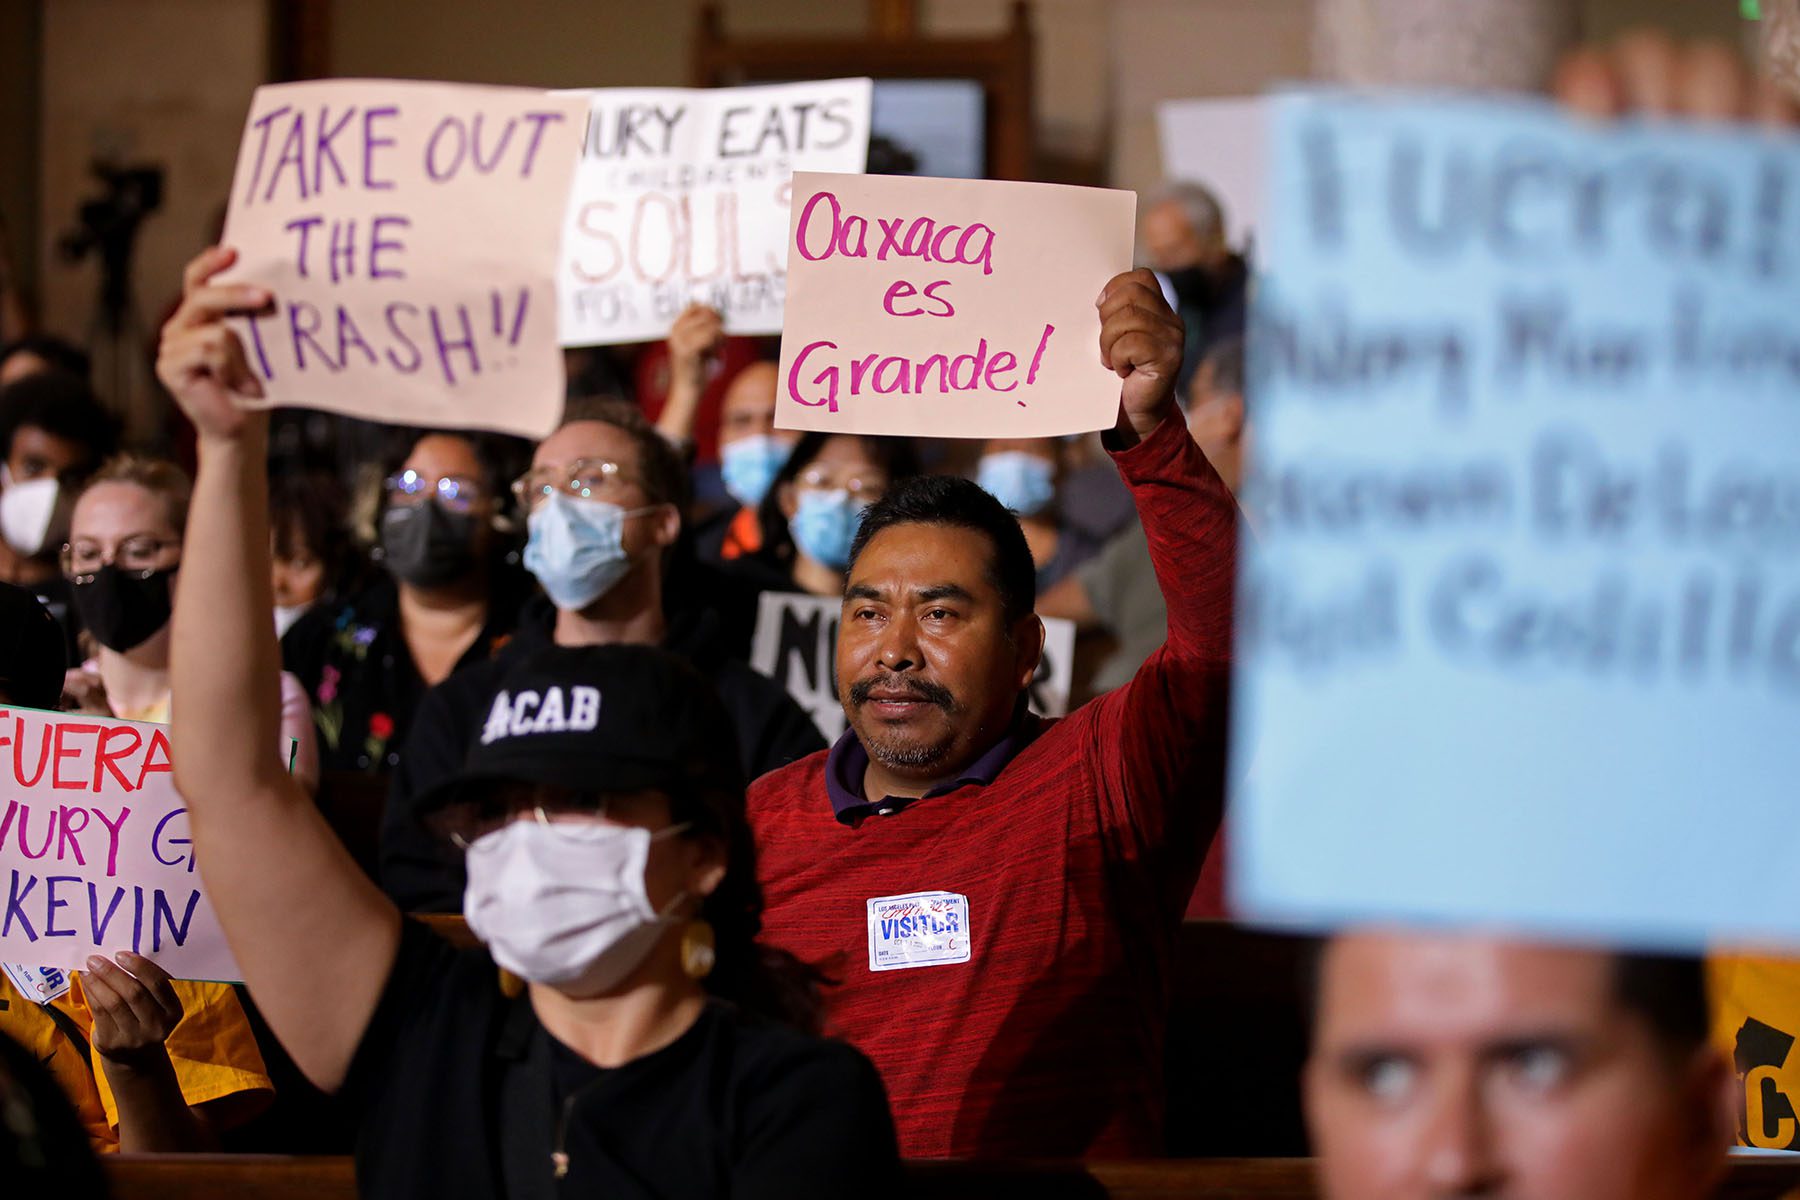 Protestors hold signs that read "Oaxaca es grande!" and "Take out the trash" at Los Angeles City Hall.